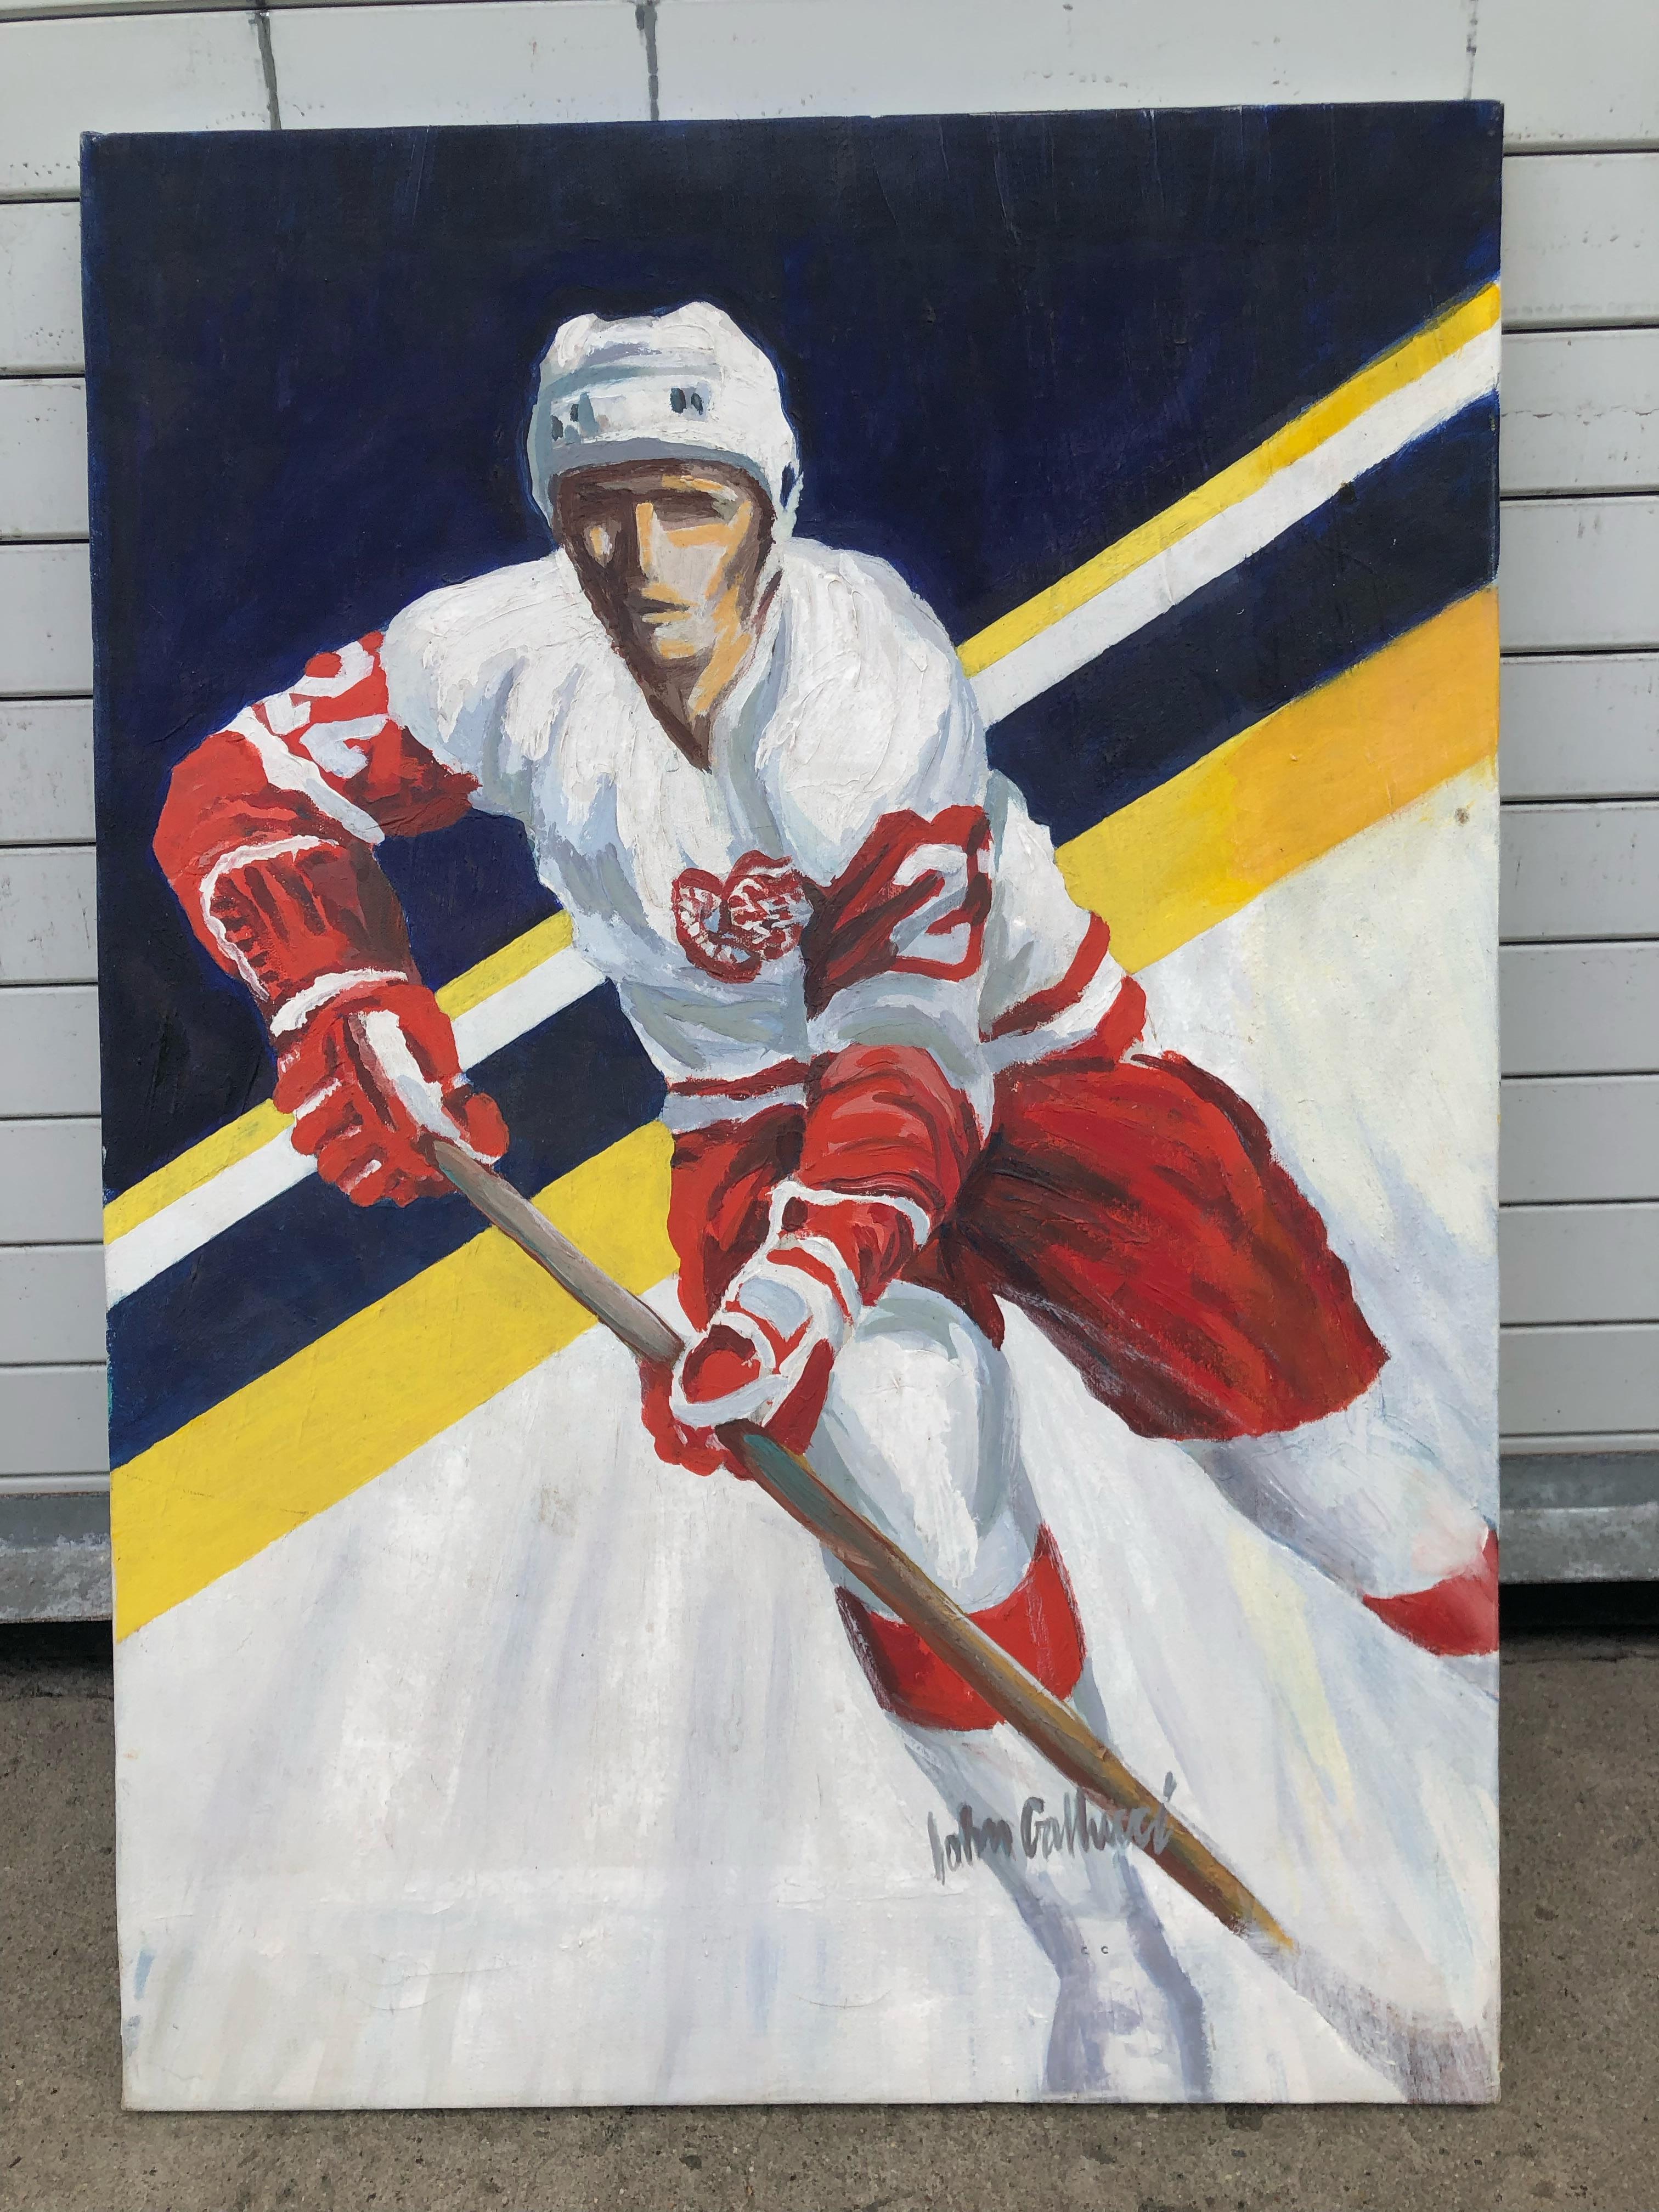 Figurative Detroit Red Wings Hockey Player Portrait - Painting by John Gallucci